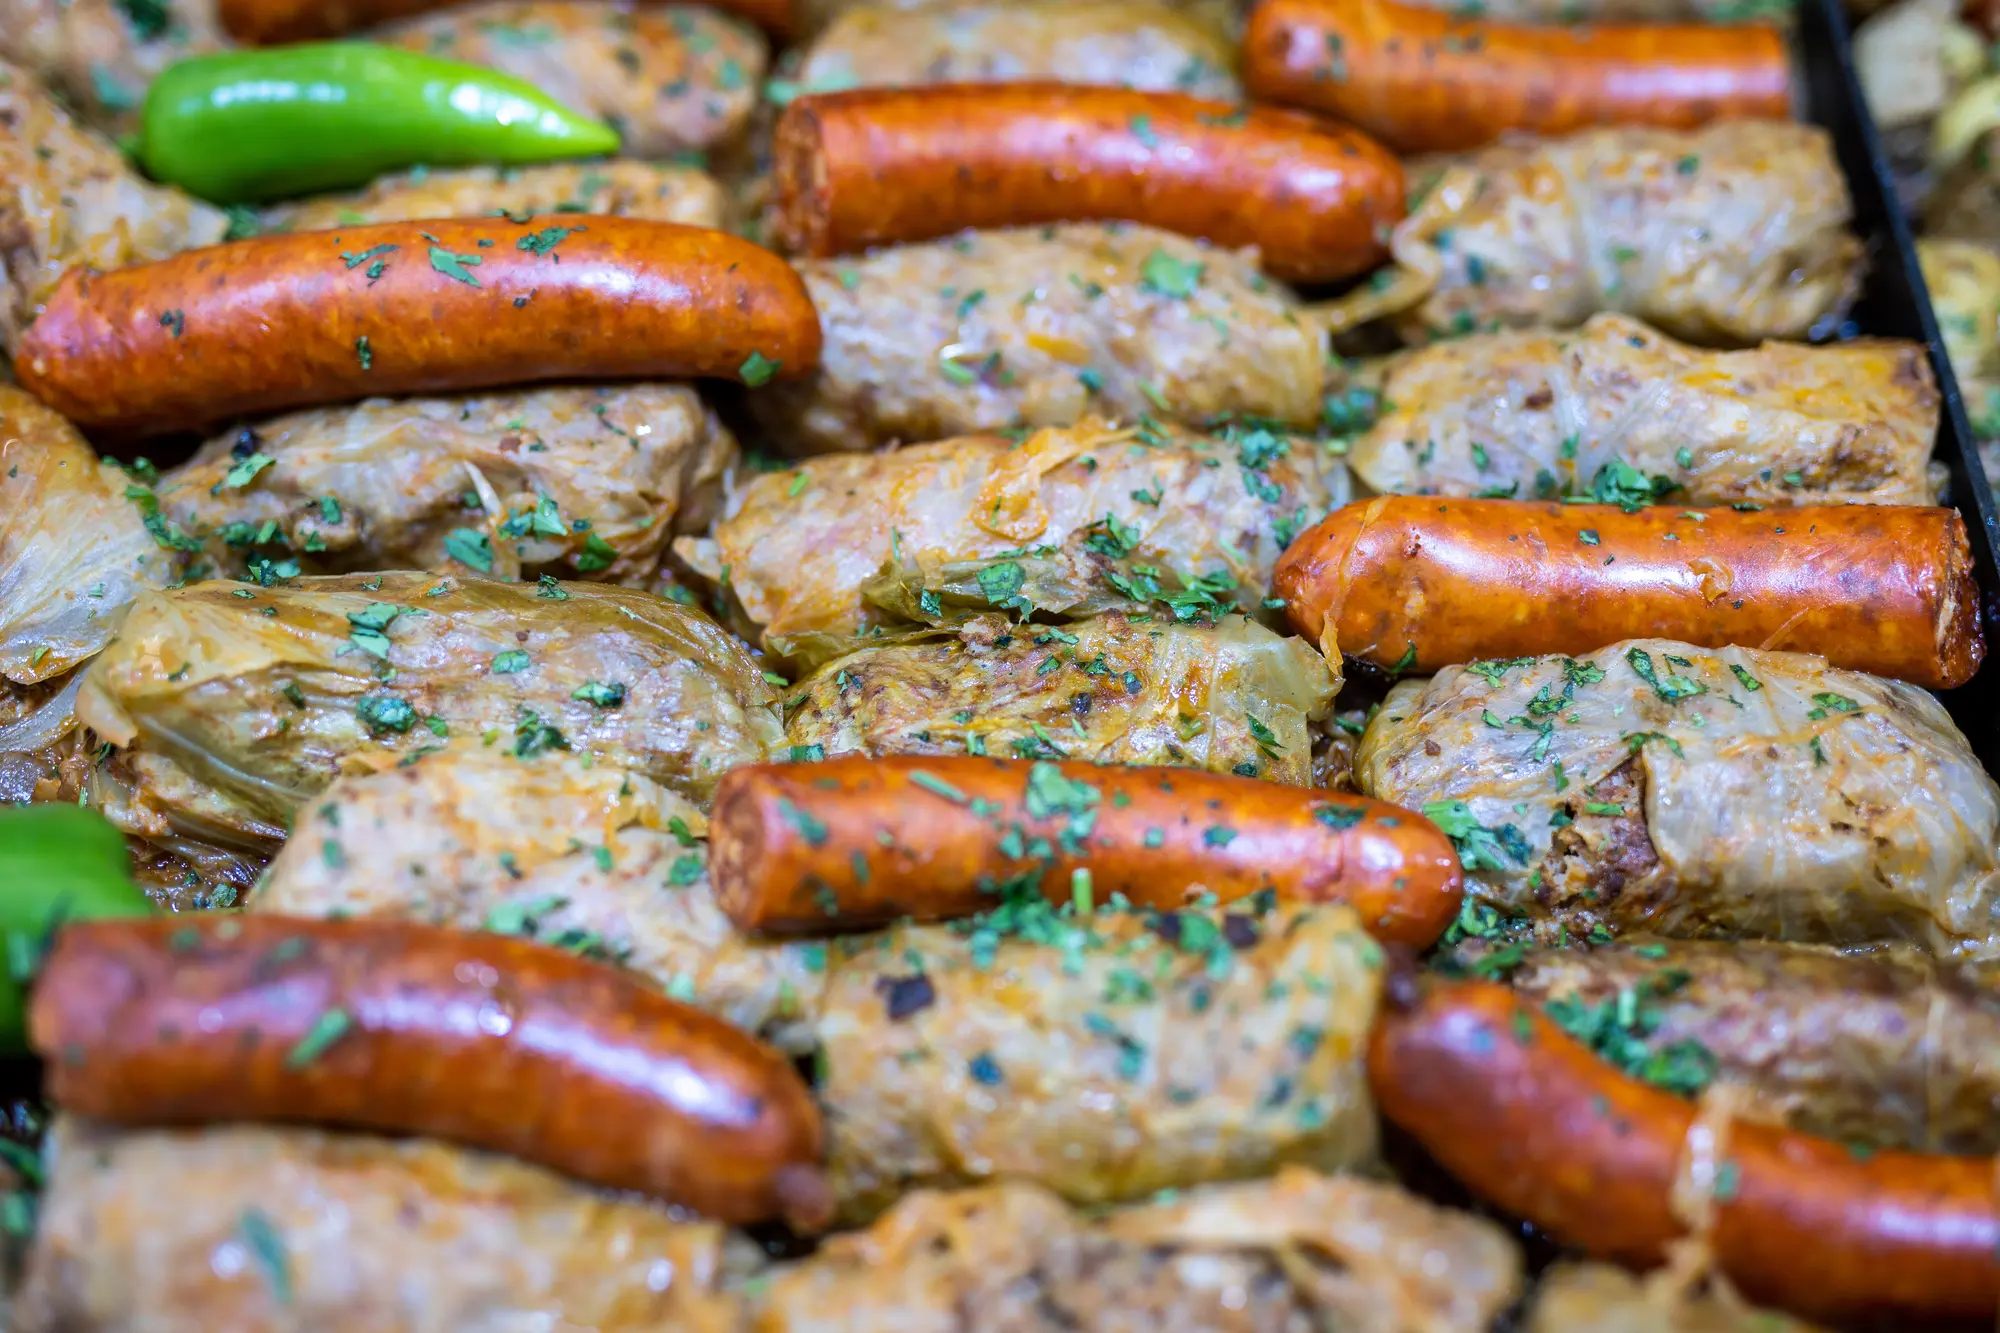 Tray of sausages and stuffed cabbage rolls at a street food stall in Budapest.